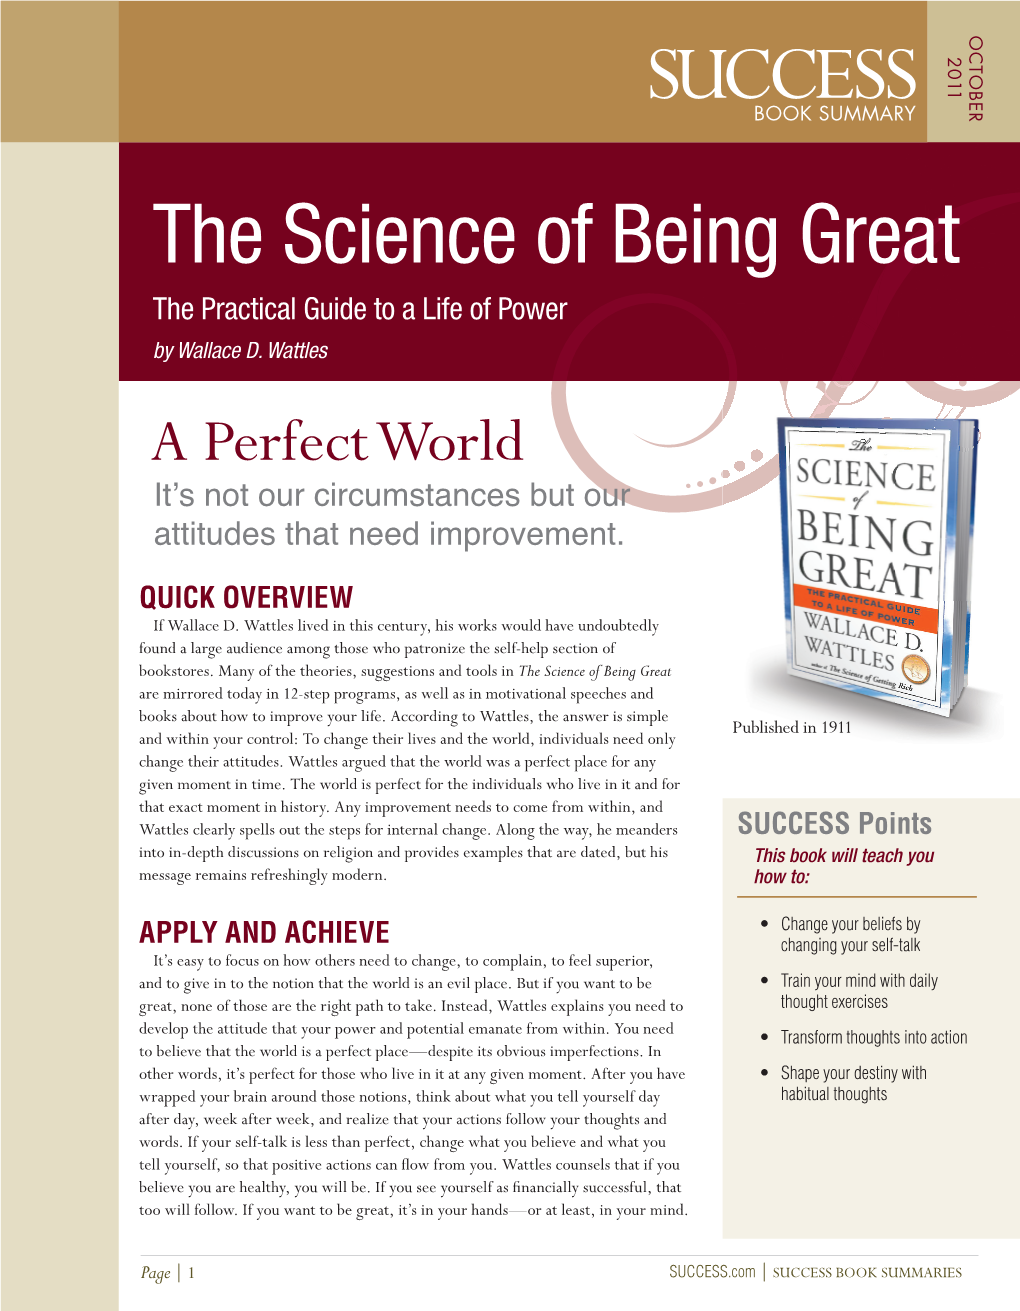 The Science of Being Great the Practical Guide to a Life of Power by Wallace D